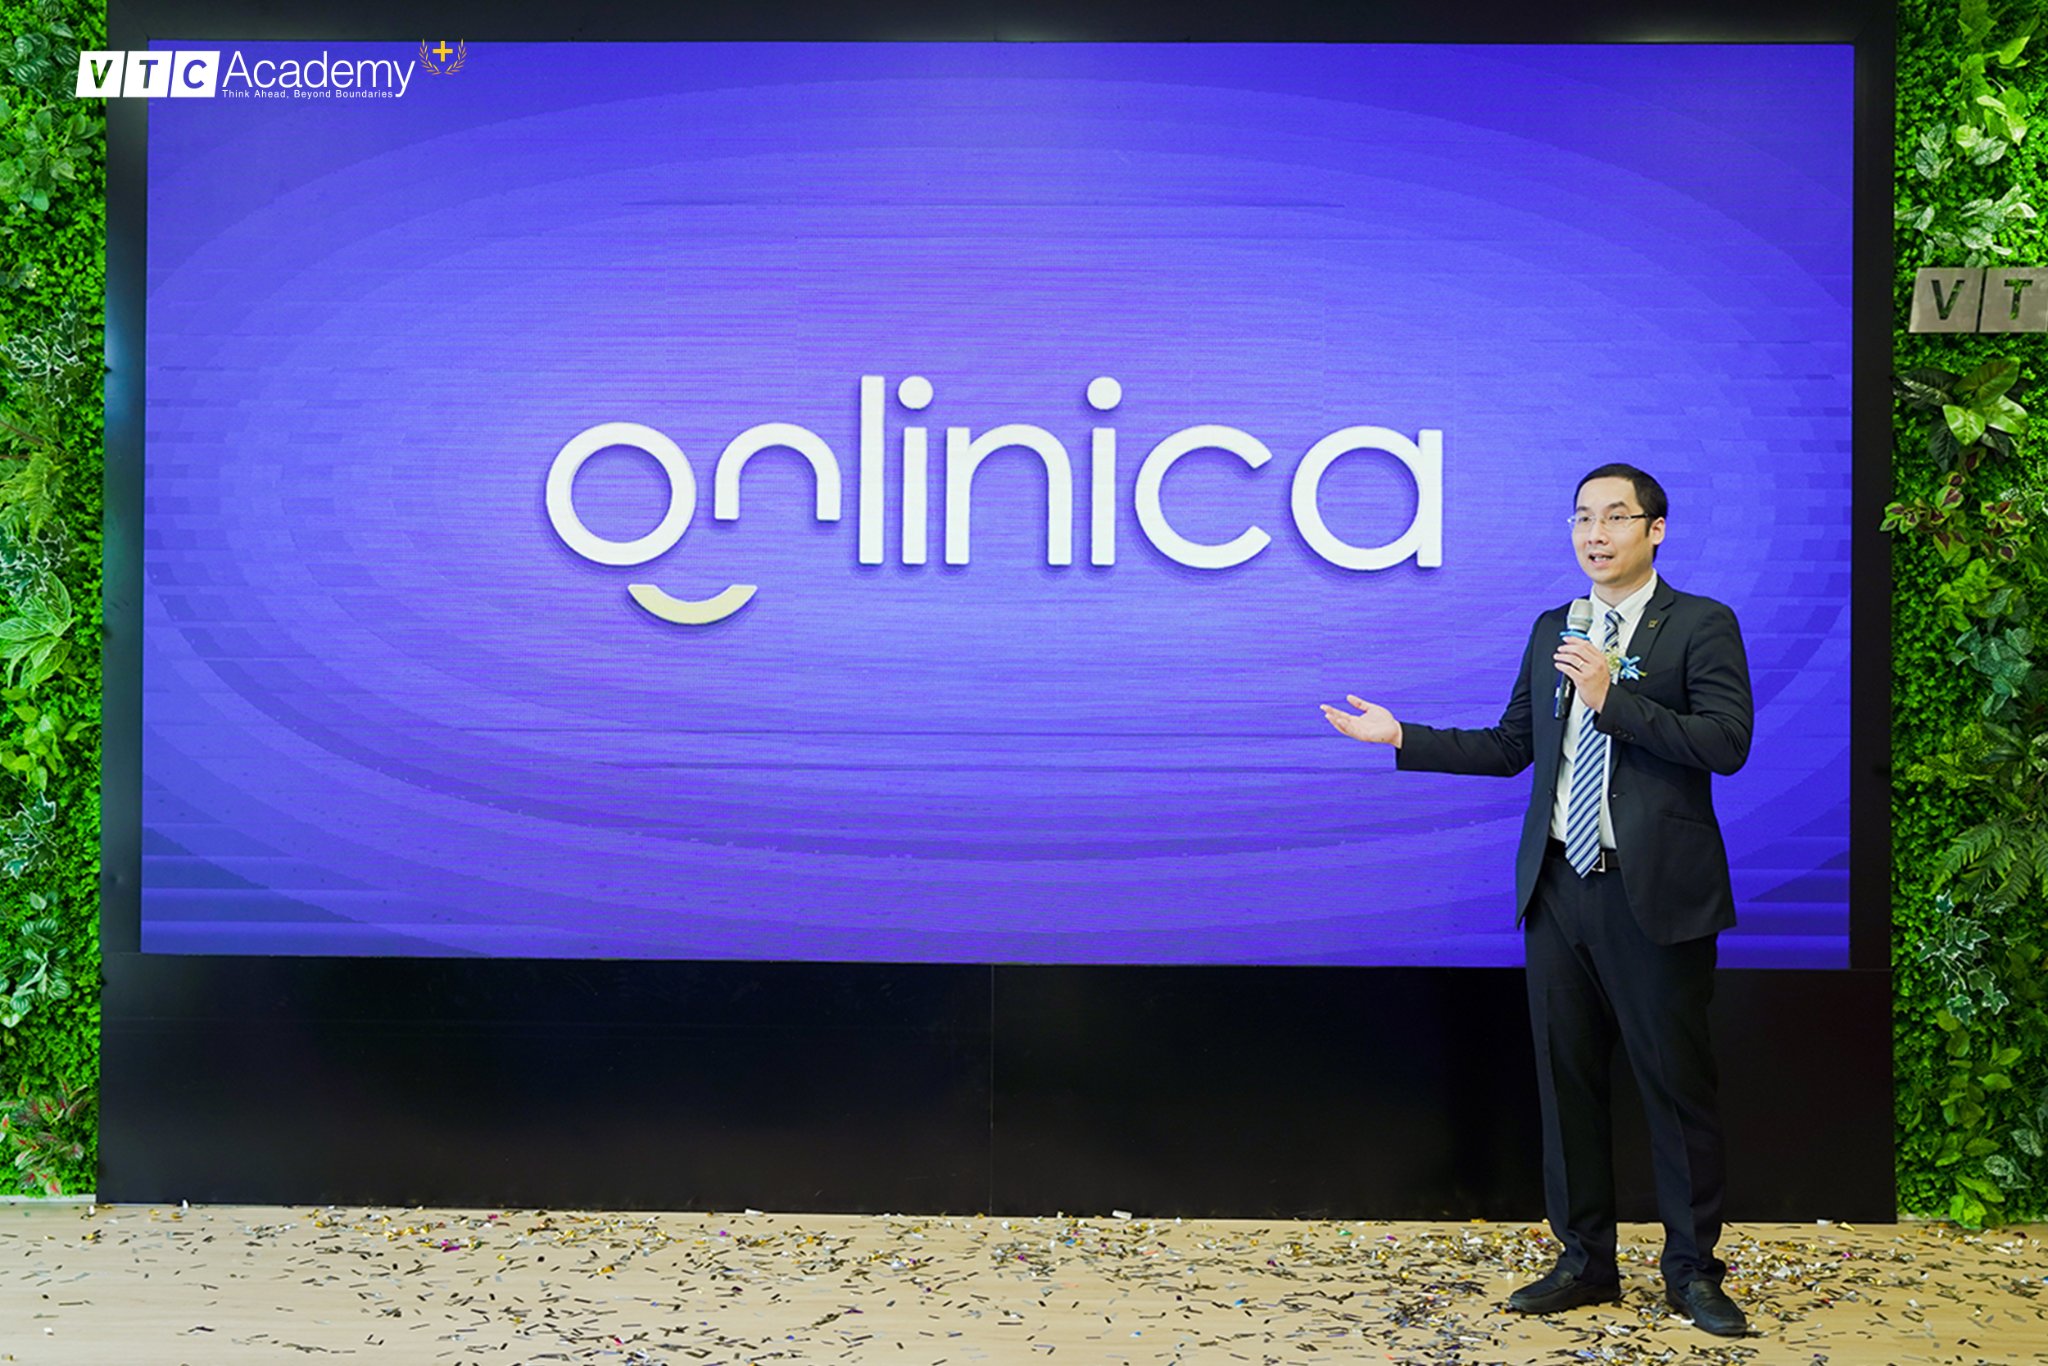 Onlinica - A new milestone of VTC Academy in the effort to build ecosystem applied modern AI technology